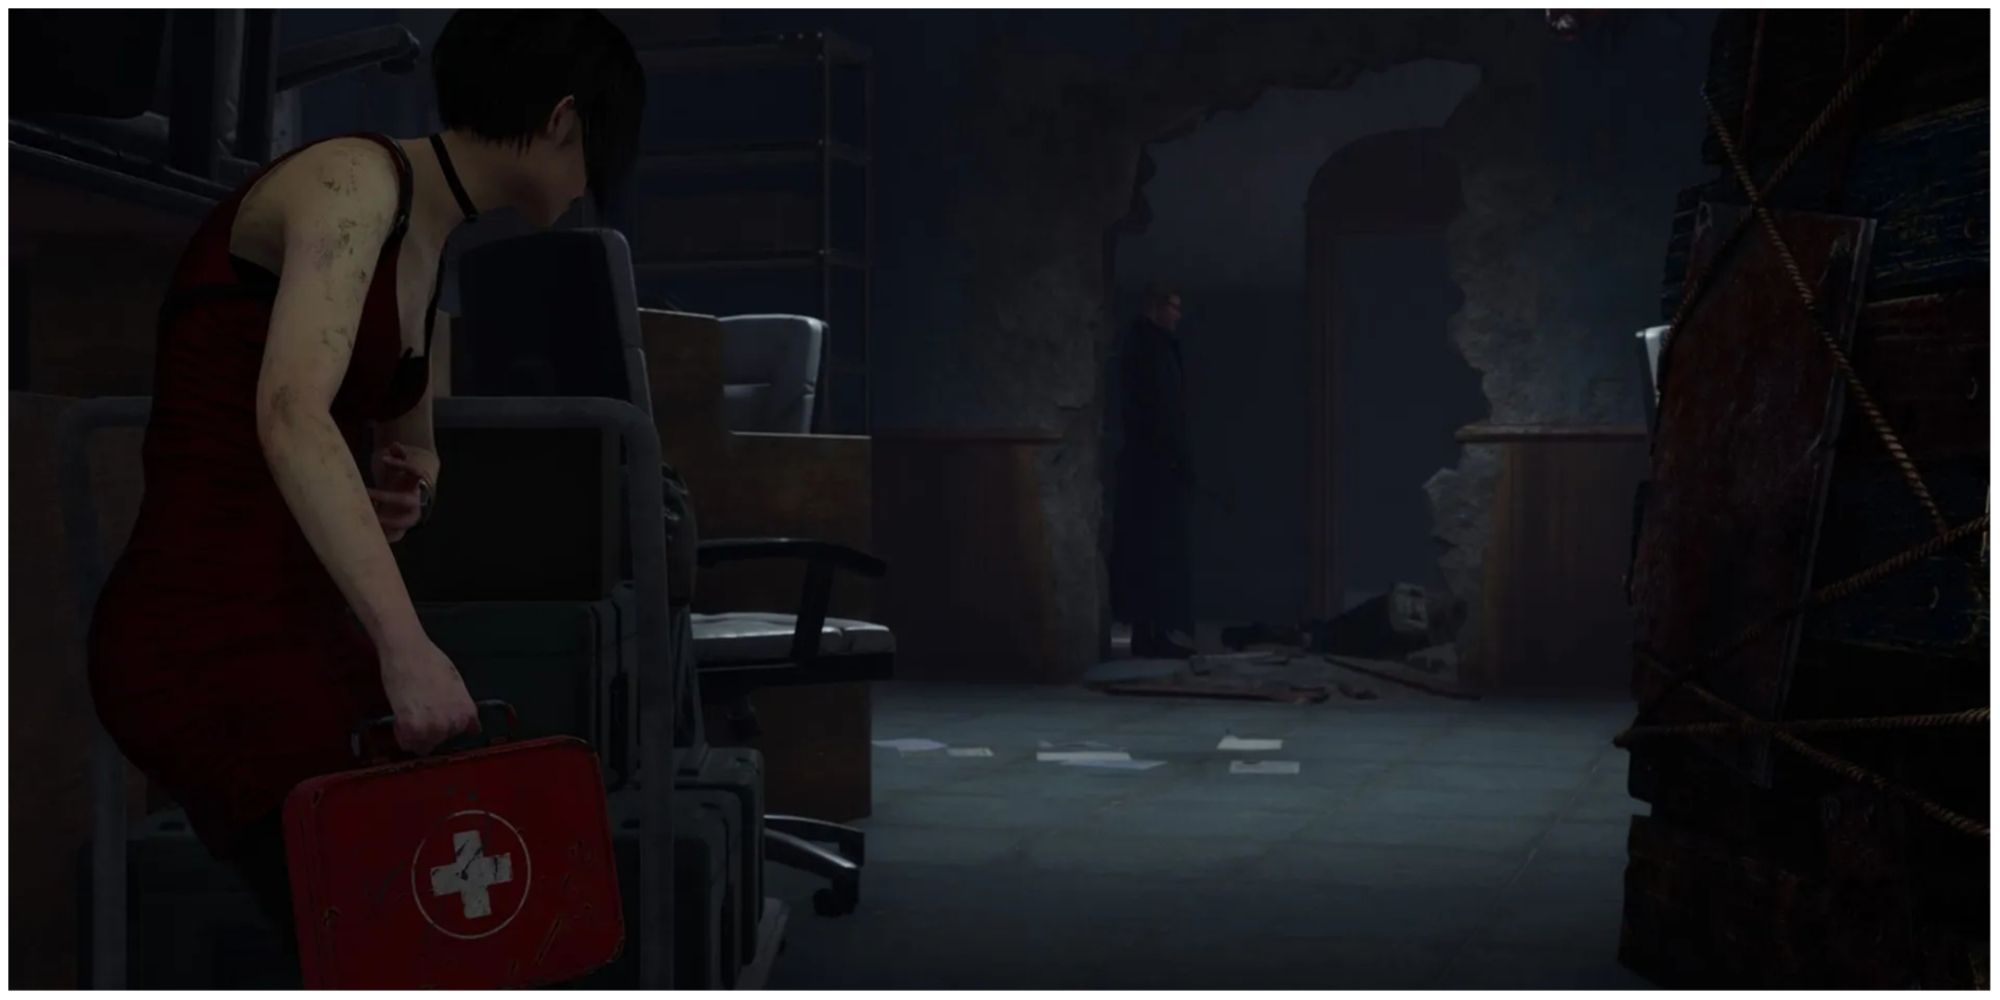 Dead by Daylight Ada Wong holding Medkit and hiding from Albert Wesker